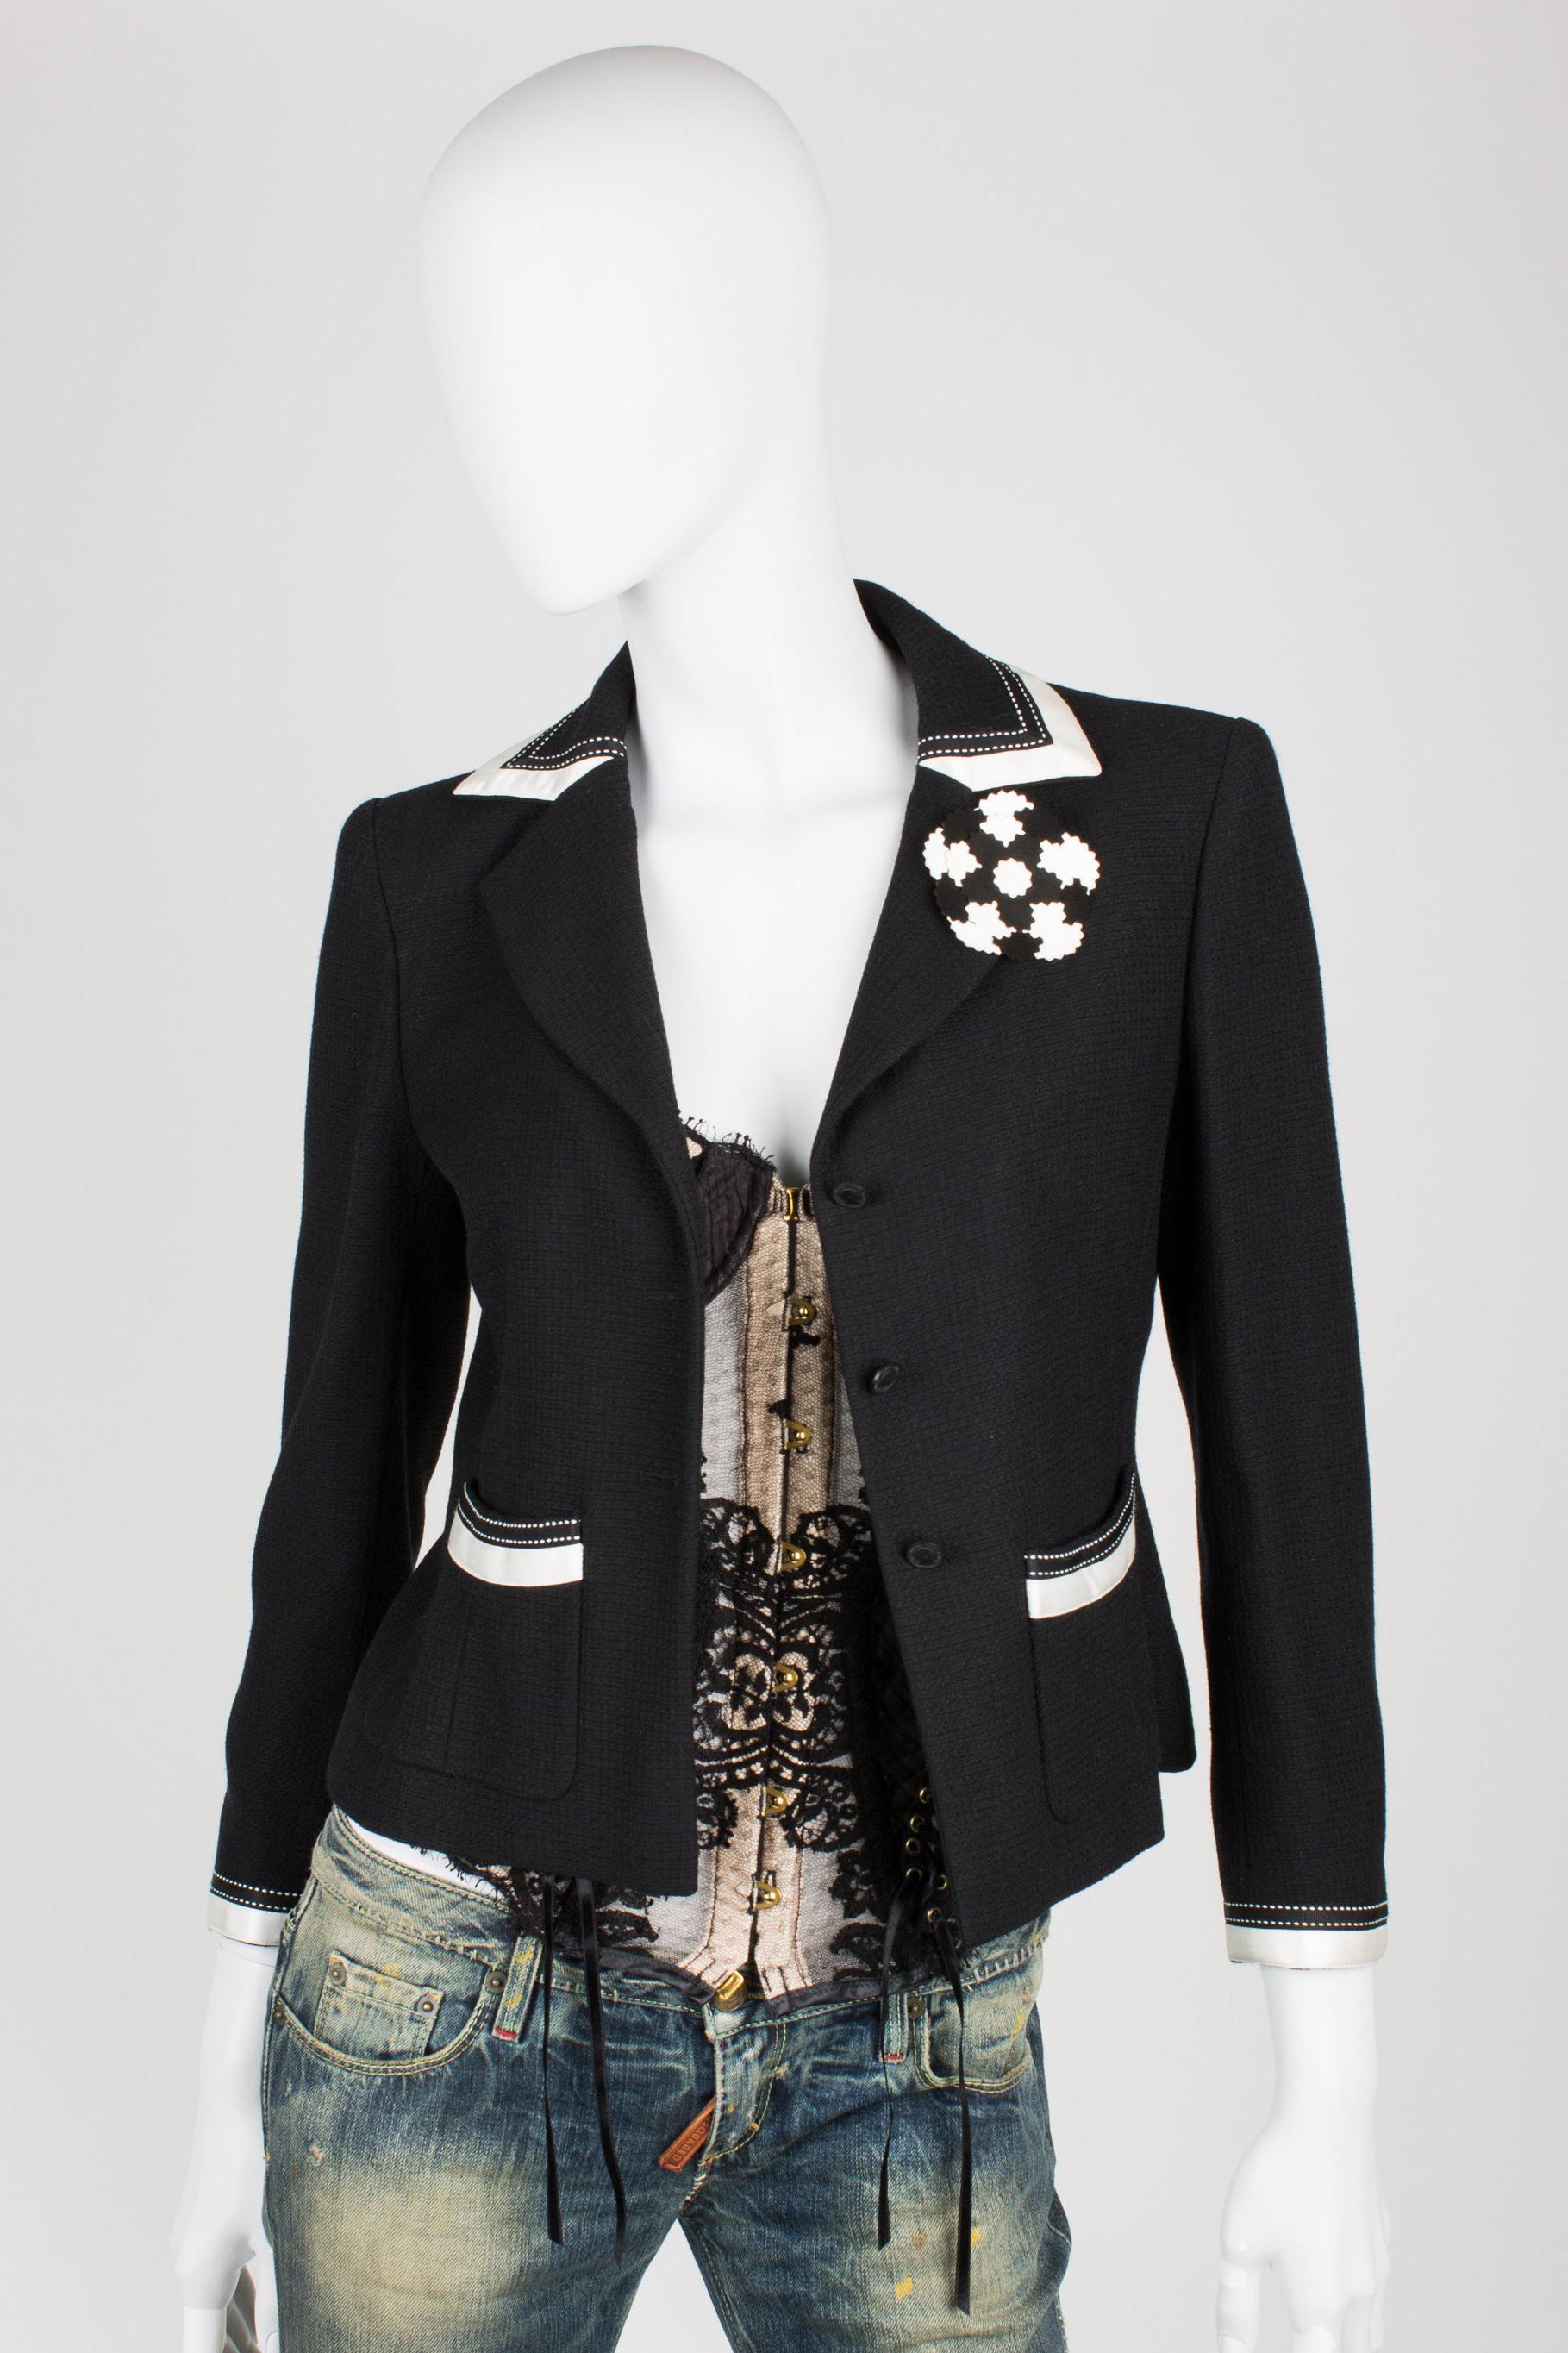 Beautiful black and white Chanel suit; a blazer and a skirt

The blazer is made of black fabric with white satin trimming. Black coin buttons at the front, three in a row. At the end of the sleeves also three of these buttons, a little bit smaller